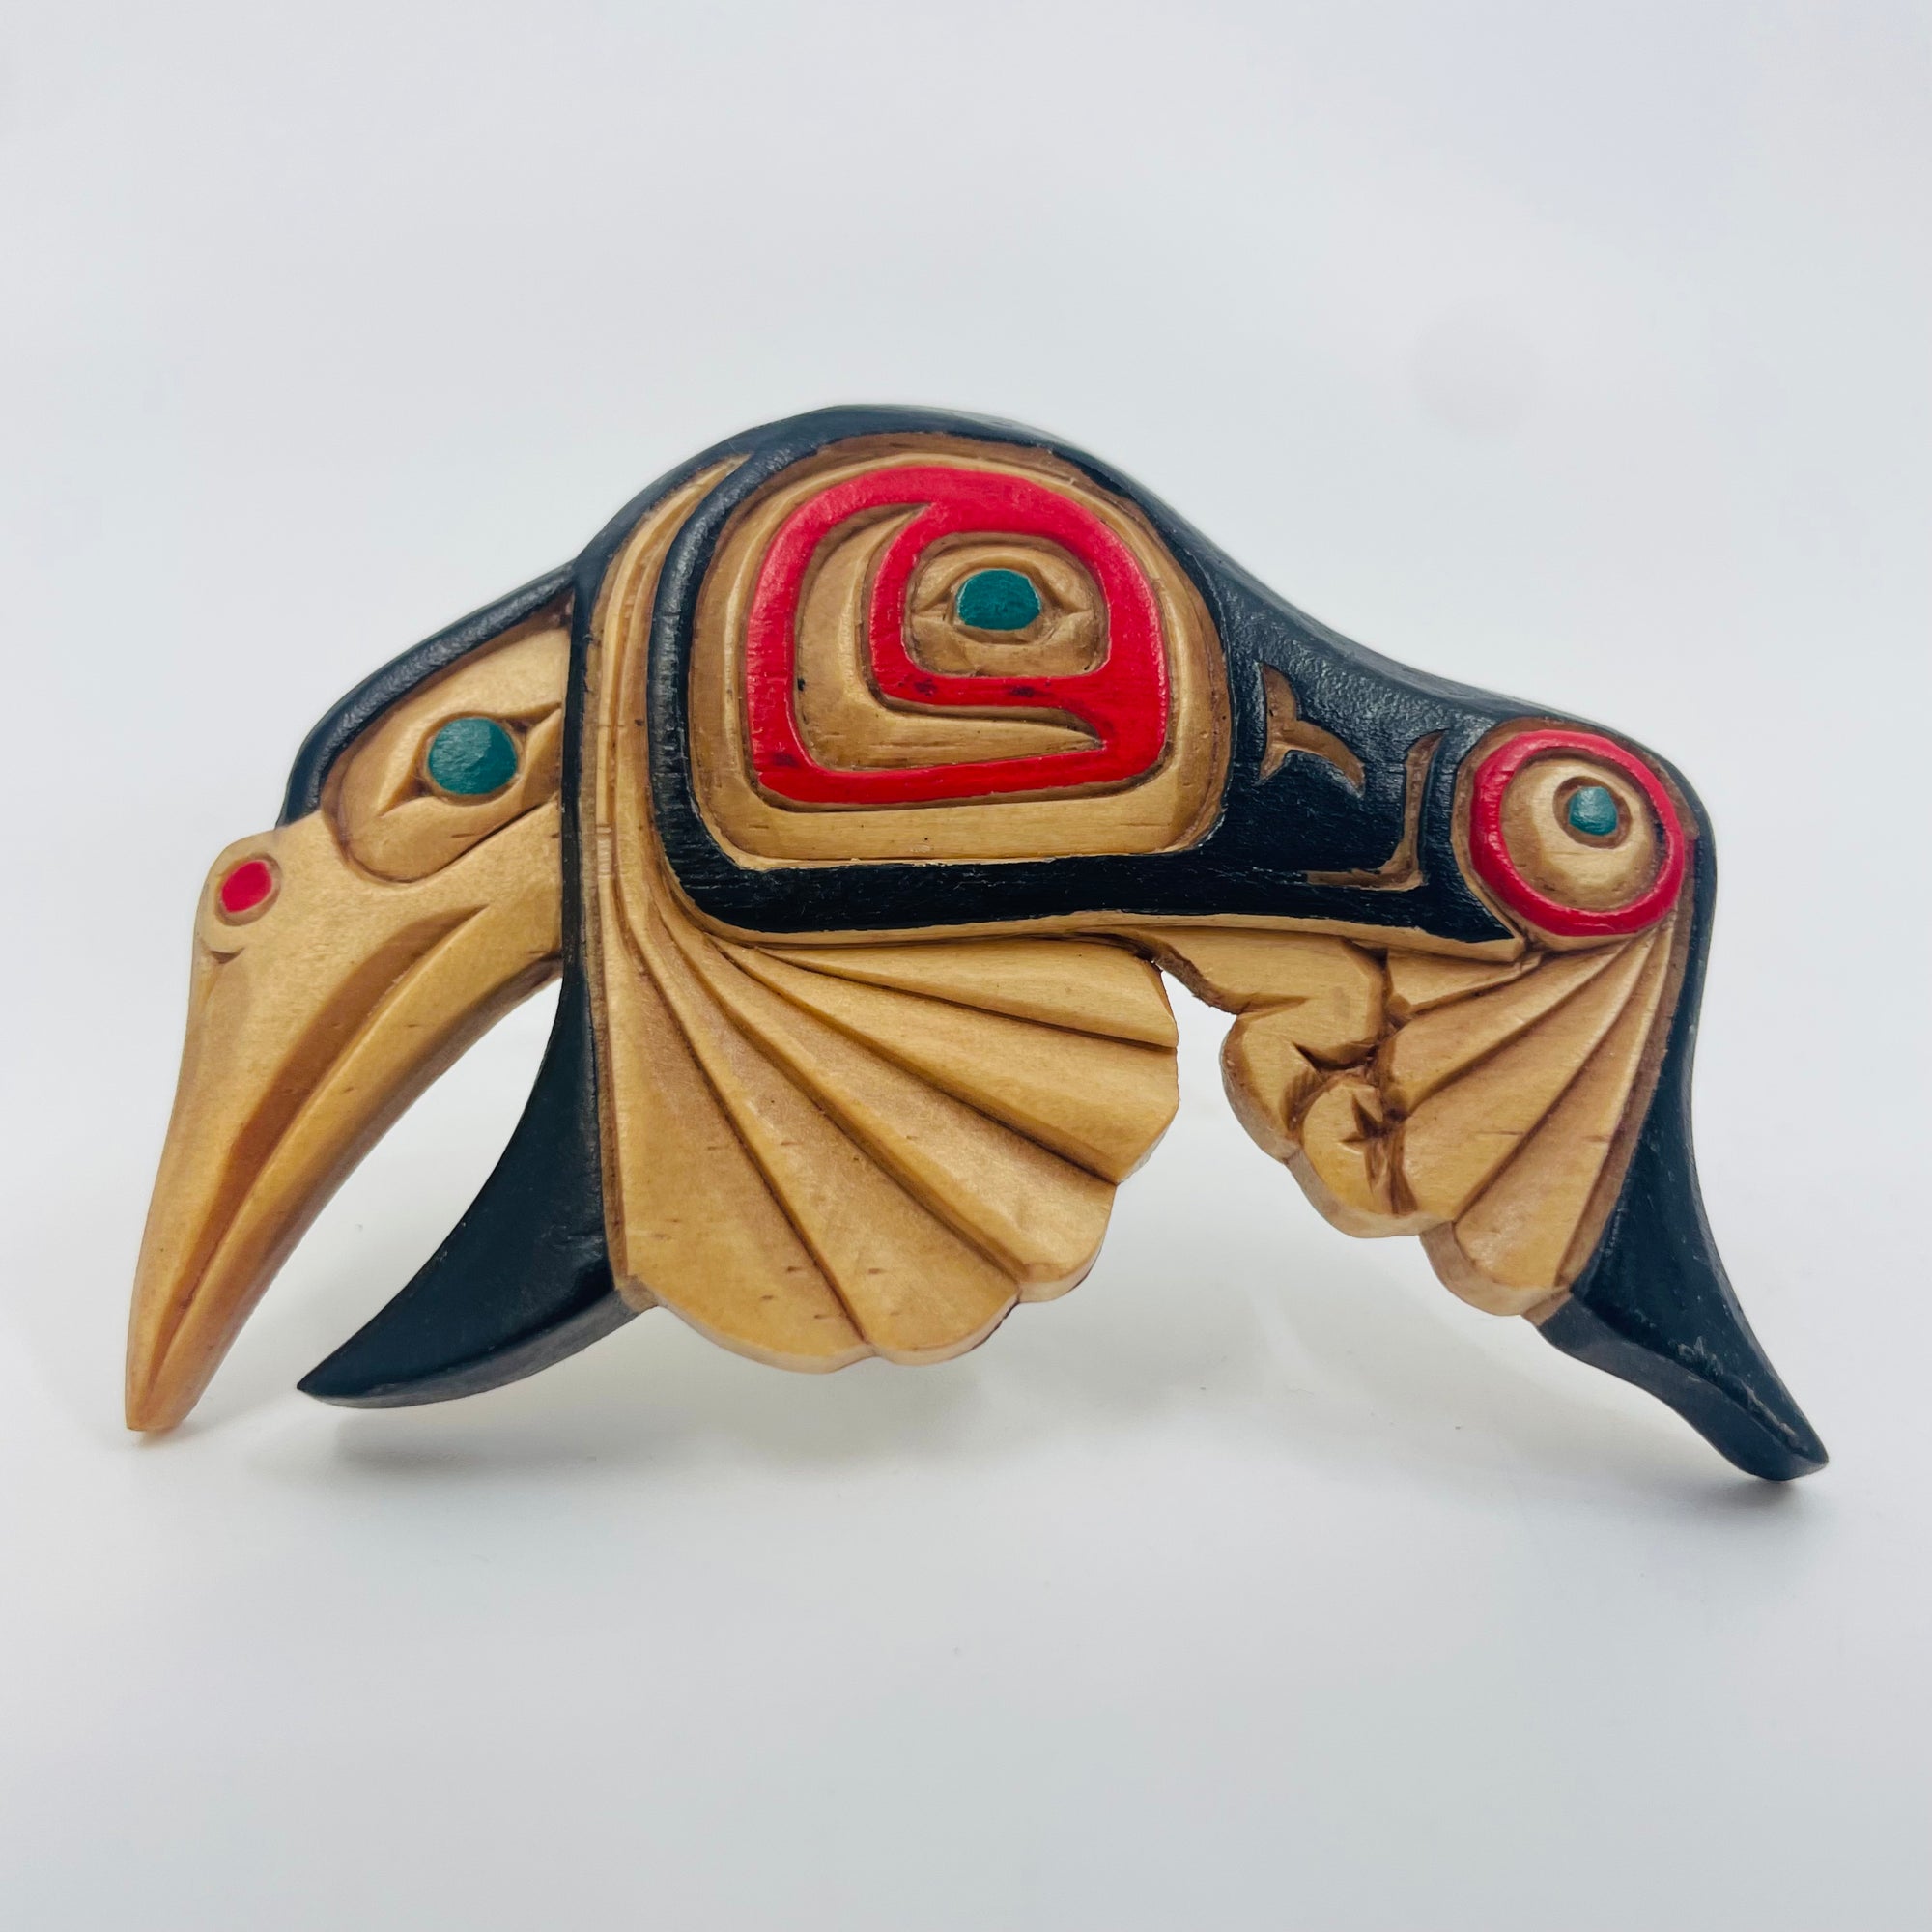 Artie George Magnets - Hummingbird V2 - WM-Magnets-34 - House of Himwitsa Native Art Gallery and Gifts